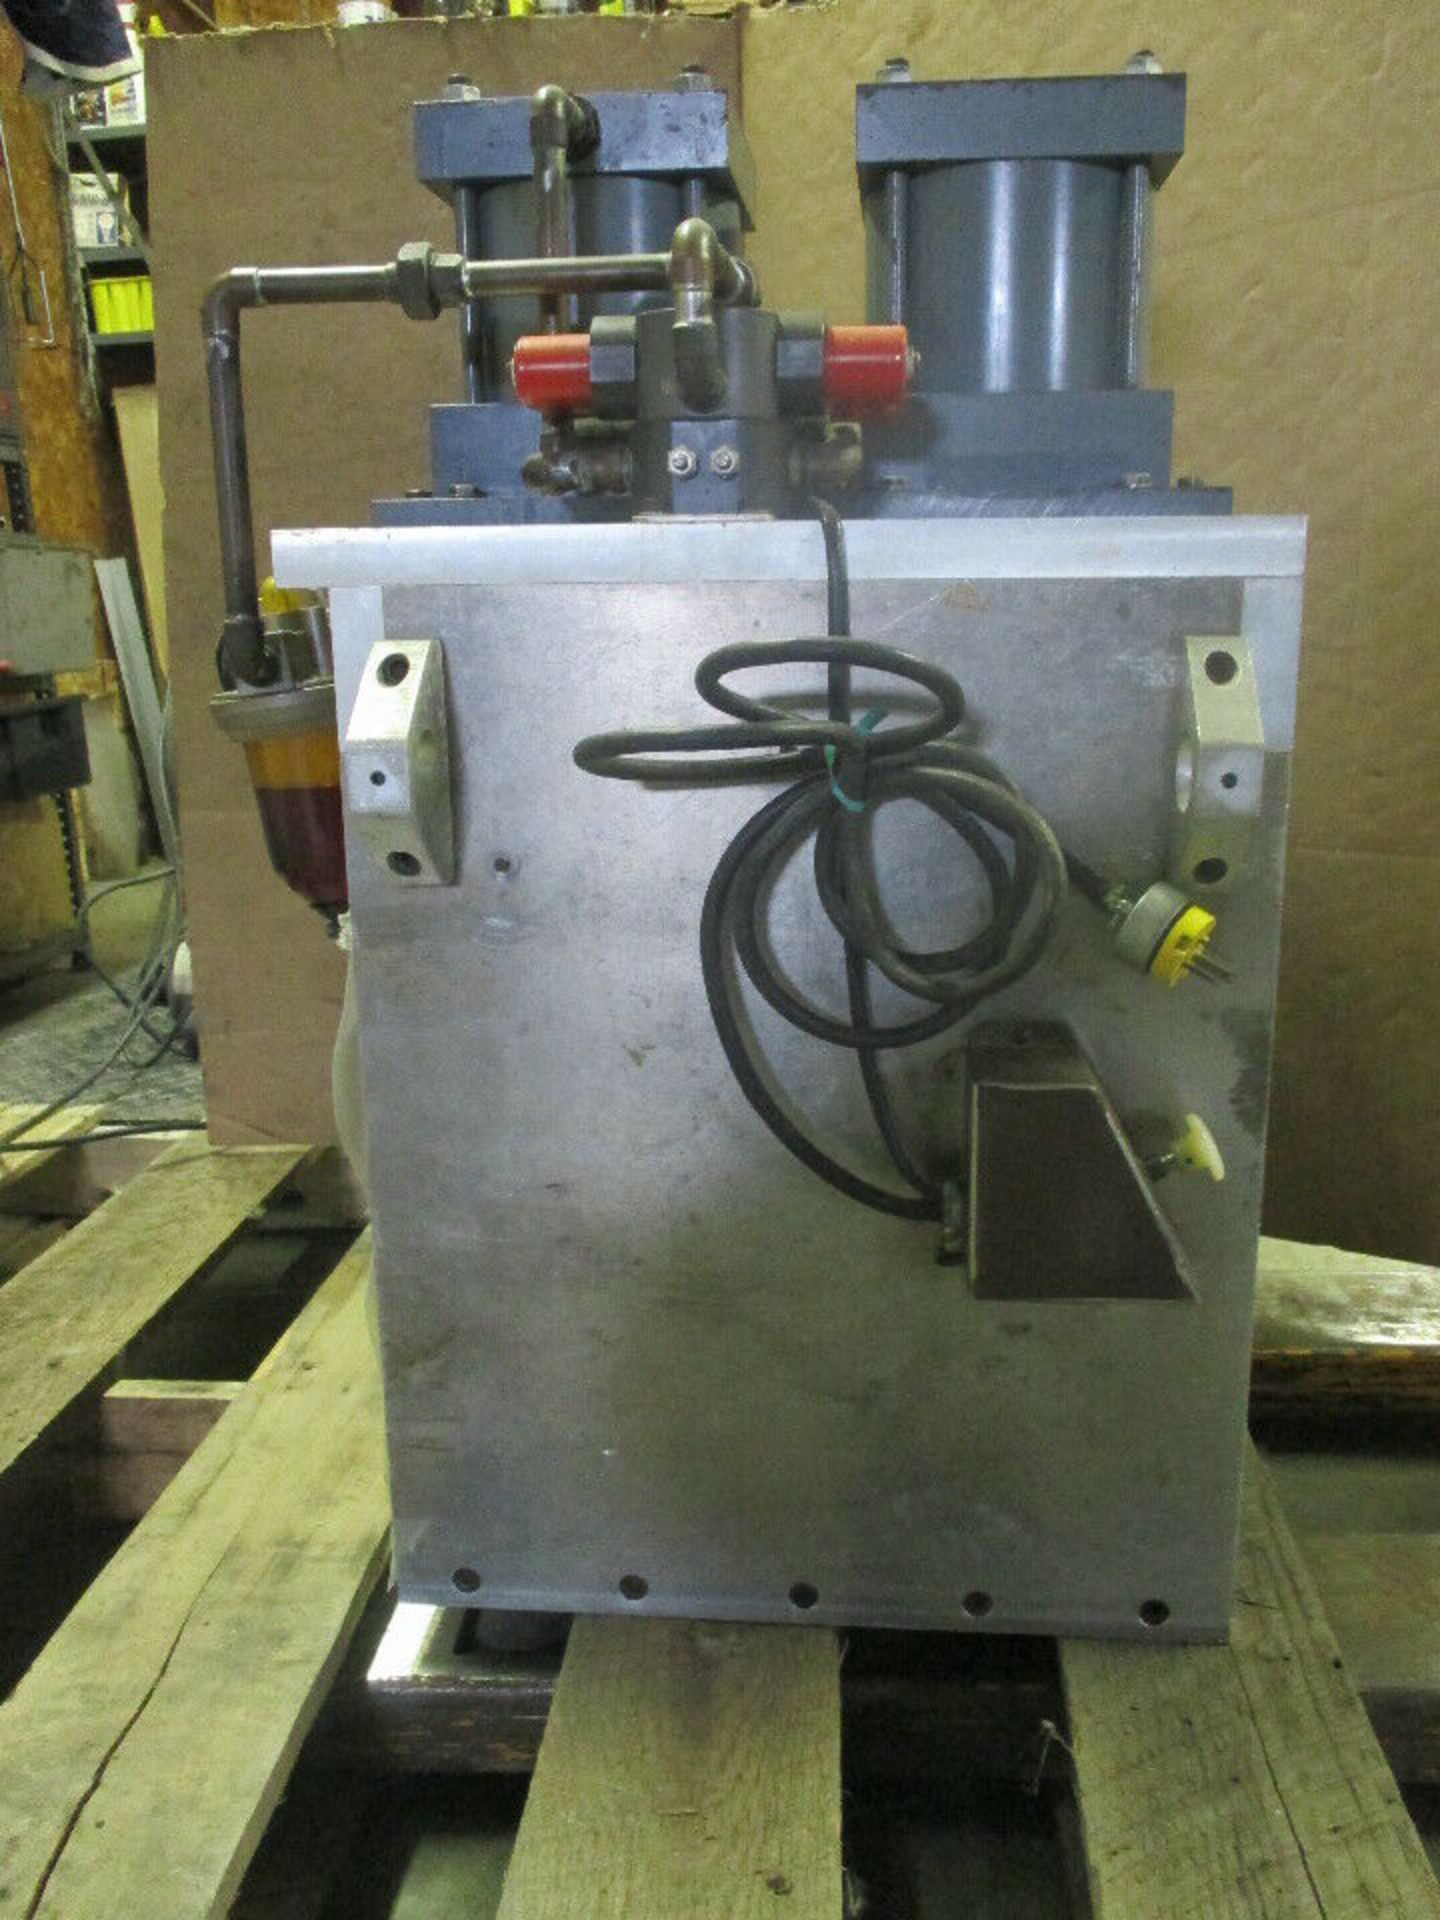 Gettig Engineering and Manufacturing 3350 Multiple Insert Machine - Image 5 of 6